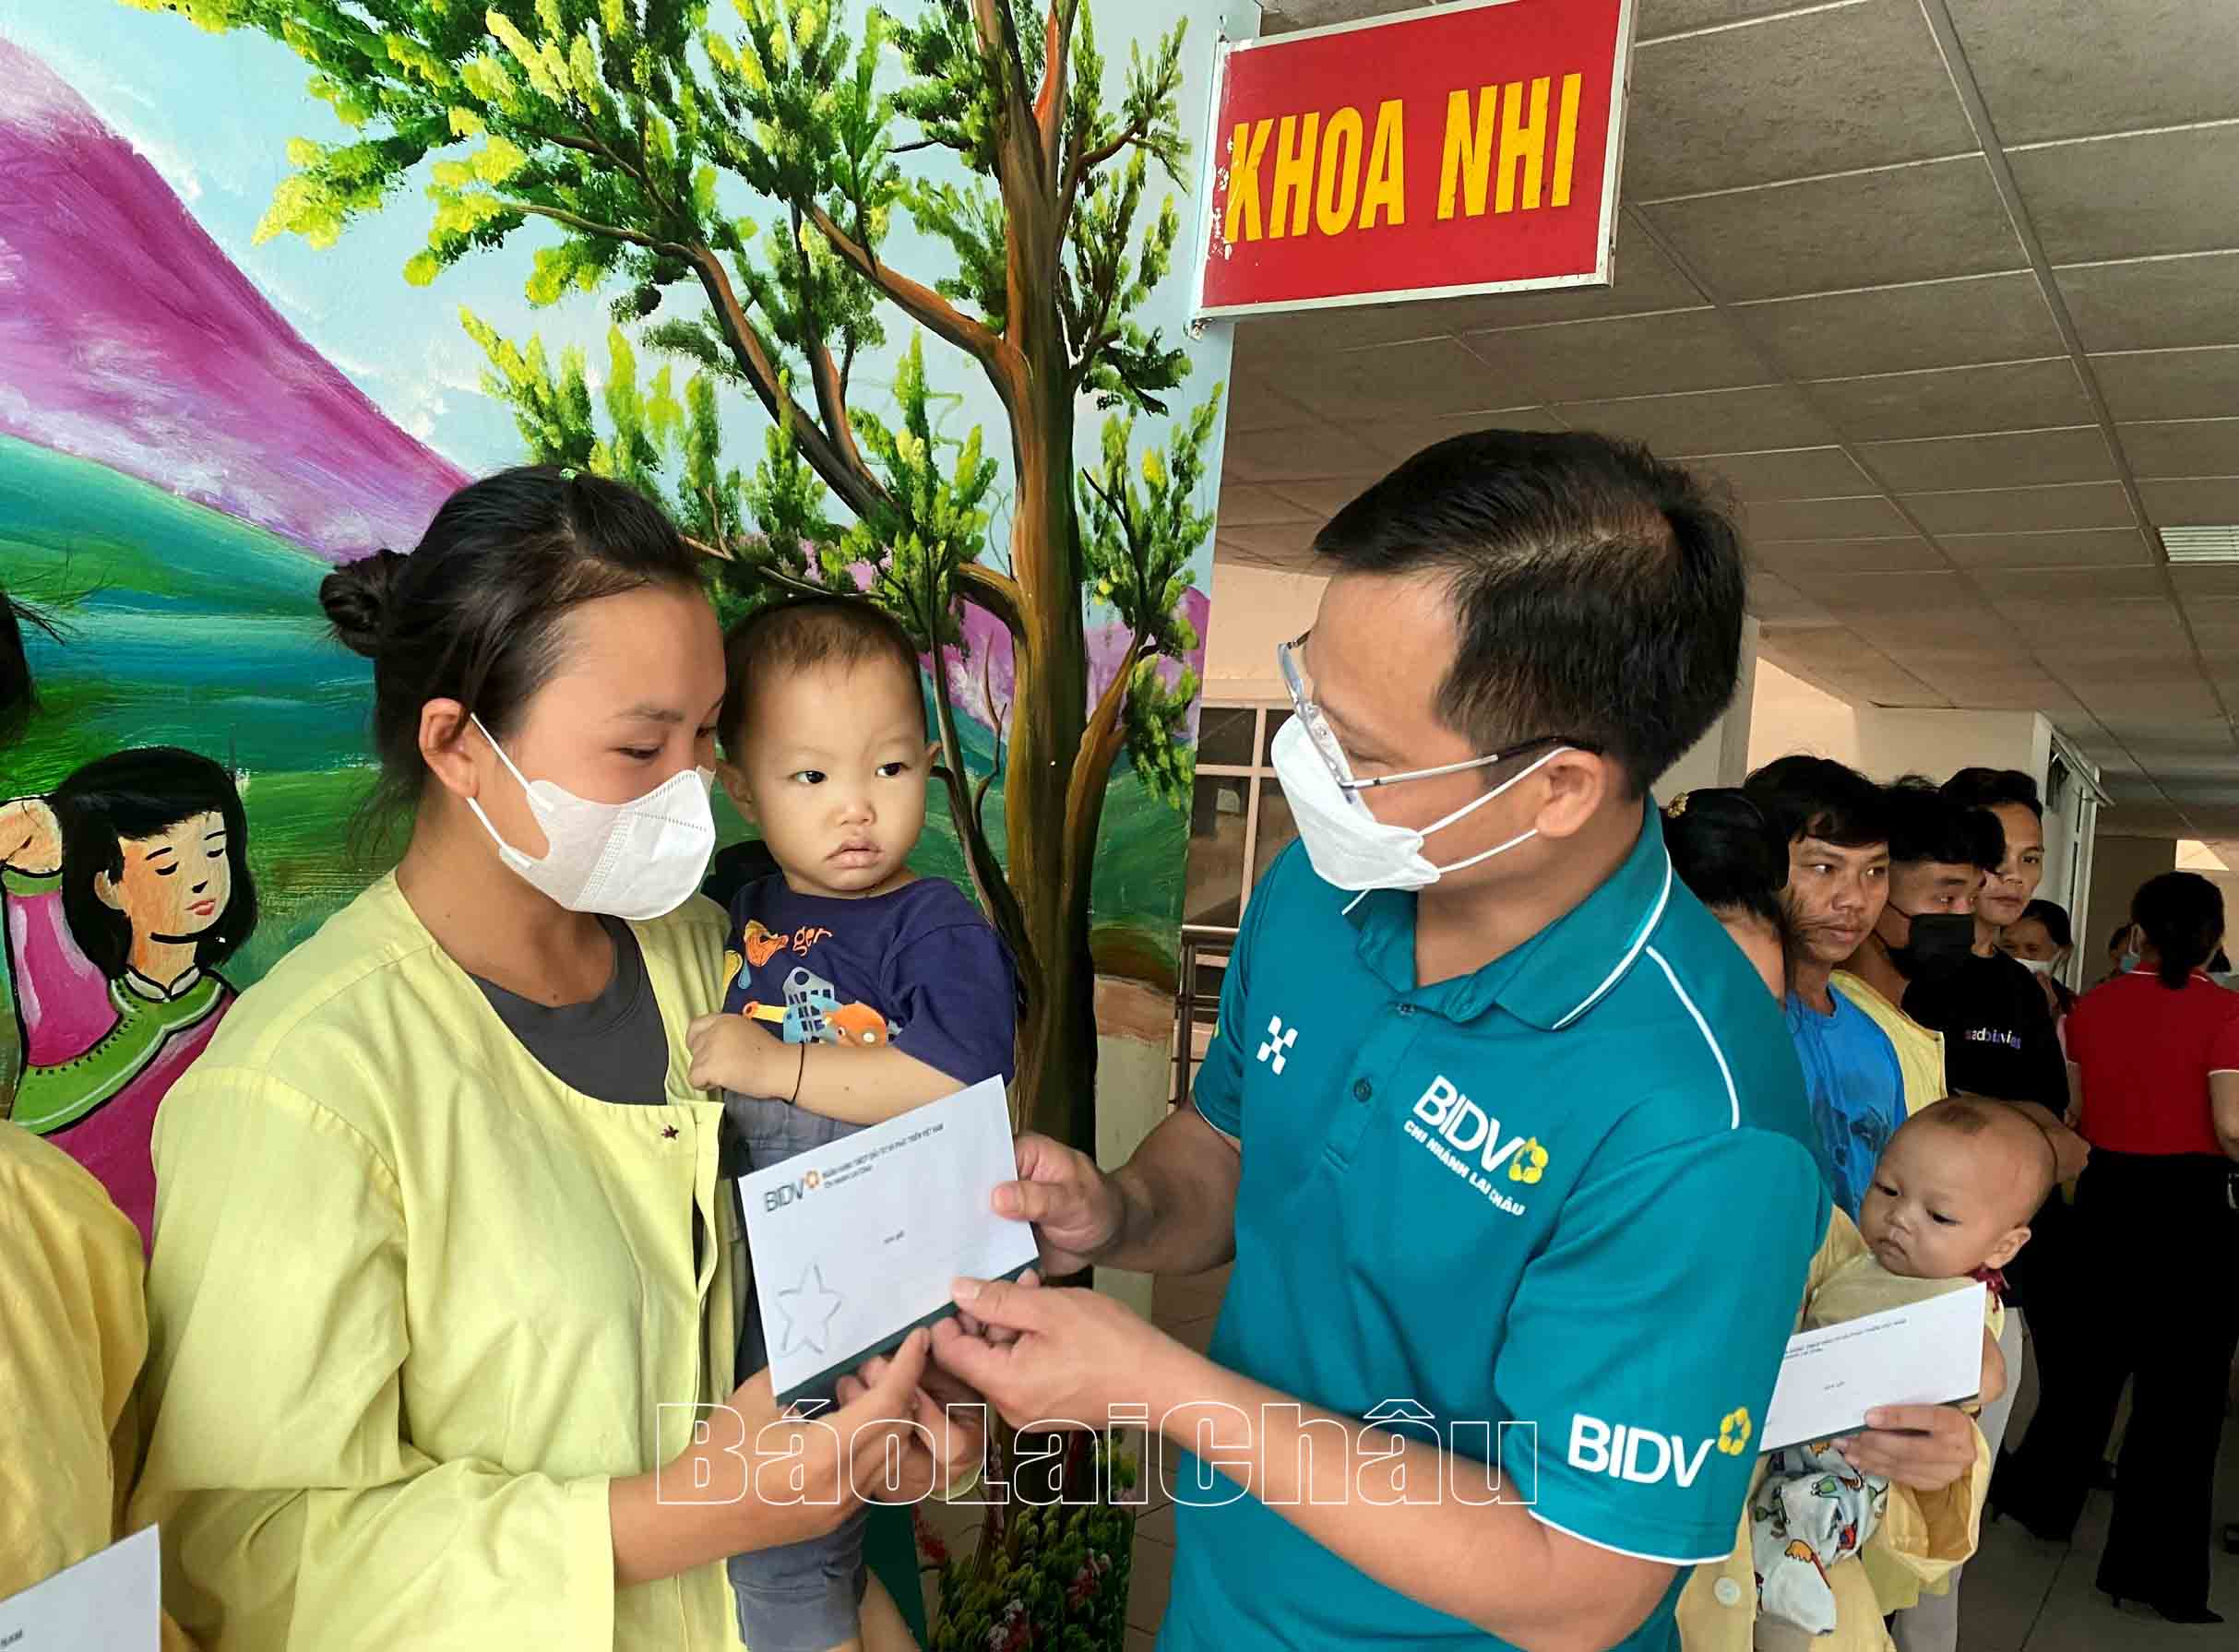 BIDV Lai Chau leaders give gifts to children with difficult circumstances being treated at the Provincial General Hospital.